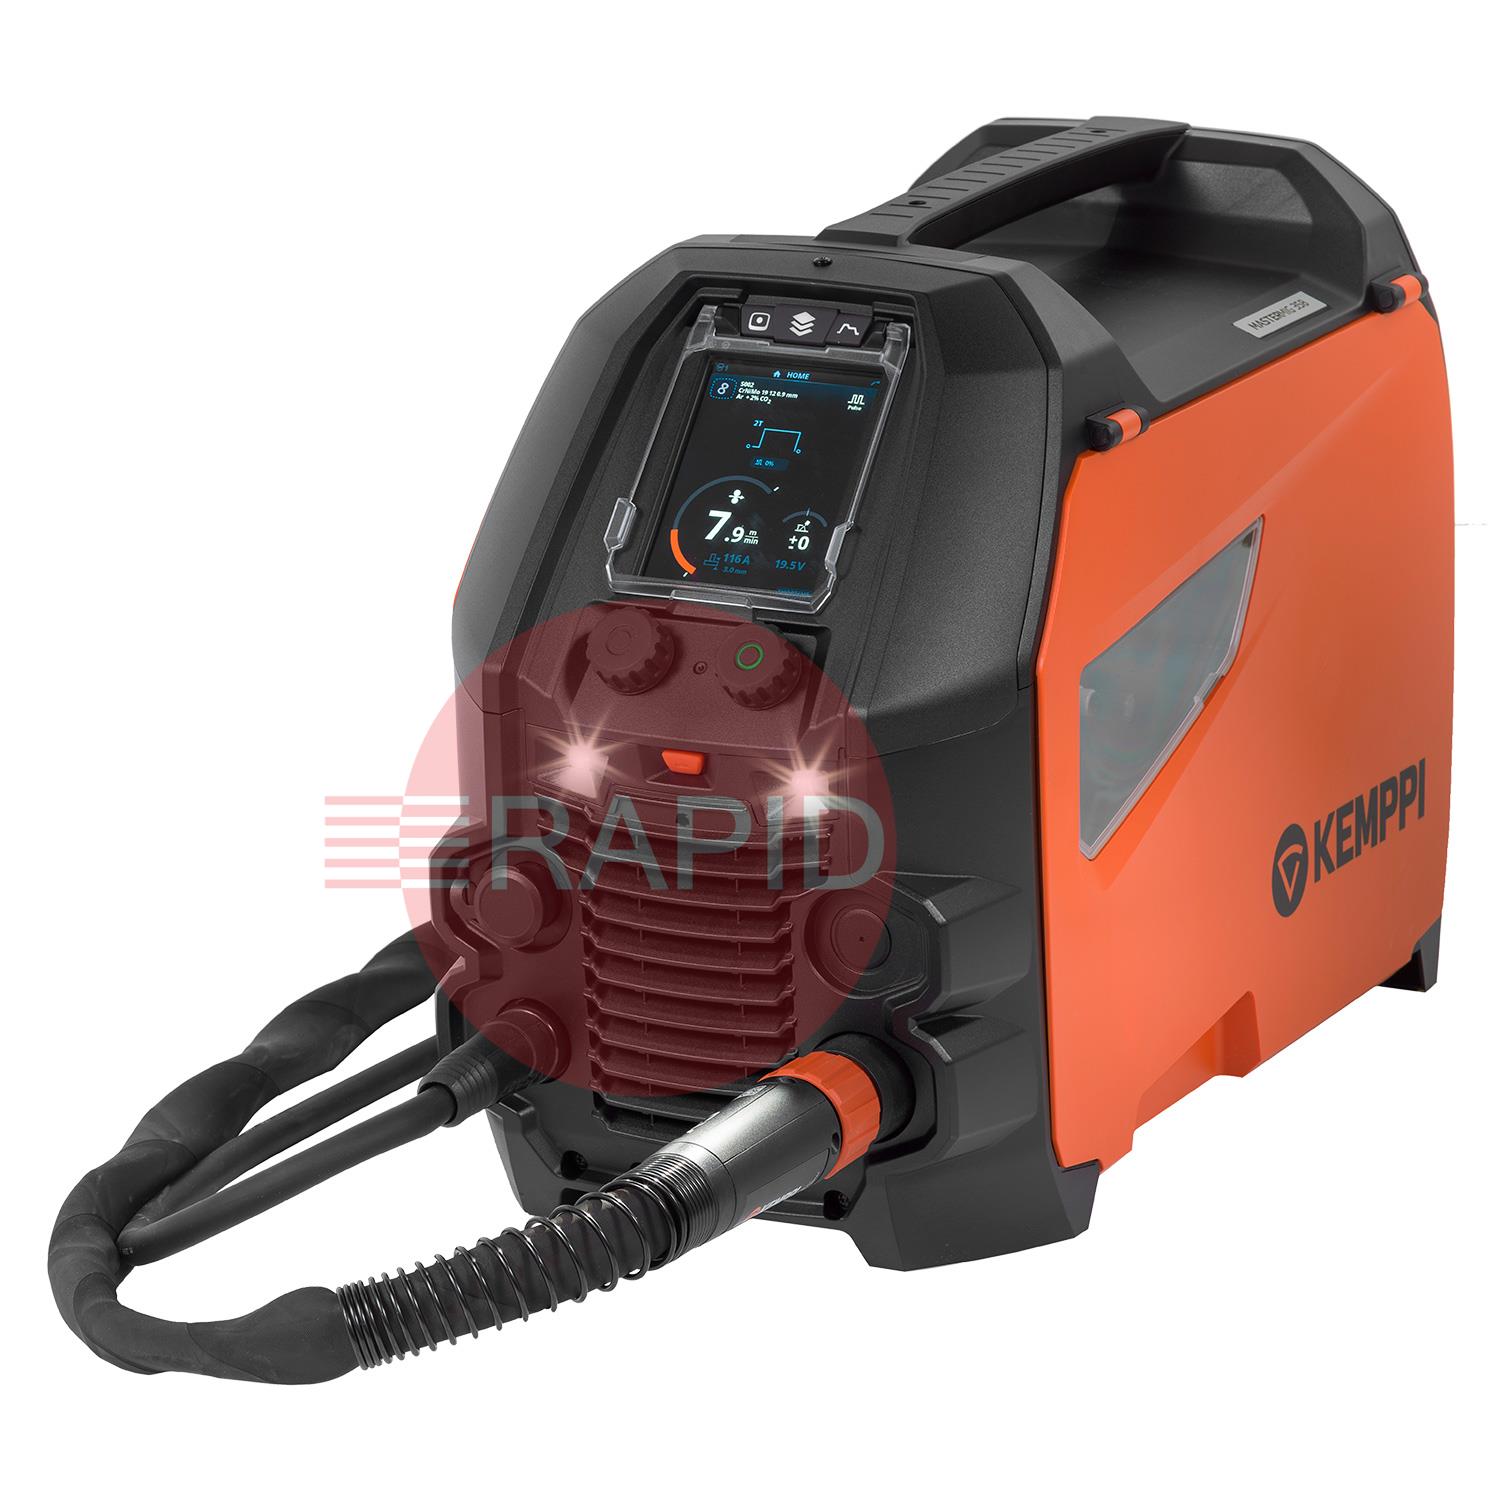 P510GXE3  Kemppi Master M 358G MIG Welder Air Cooled Package, with GXe 305G 5.0m Torch - 400v, 3ph